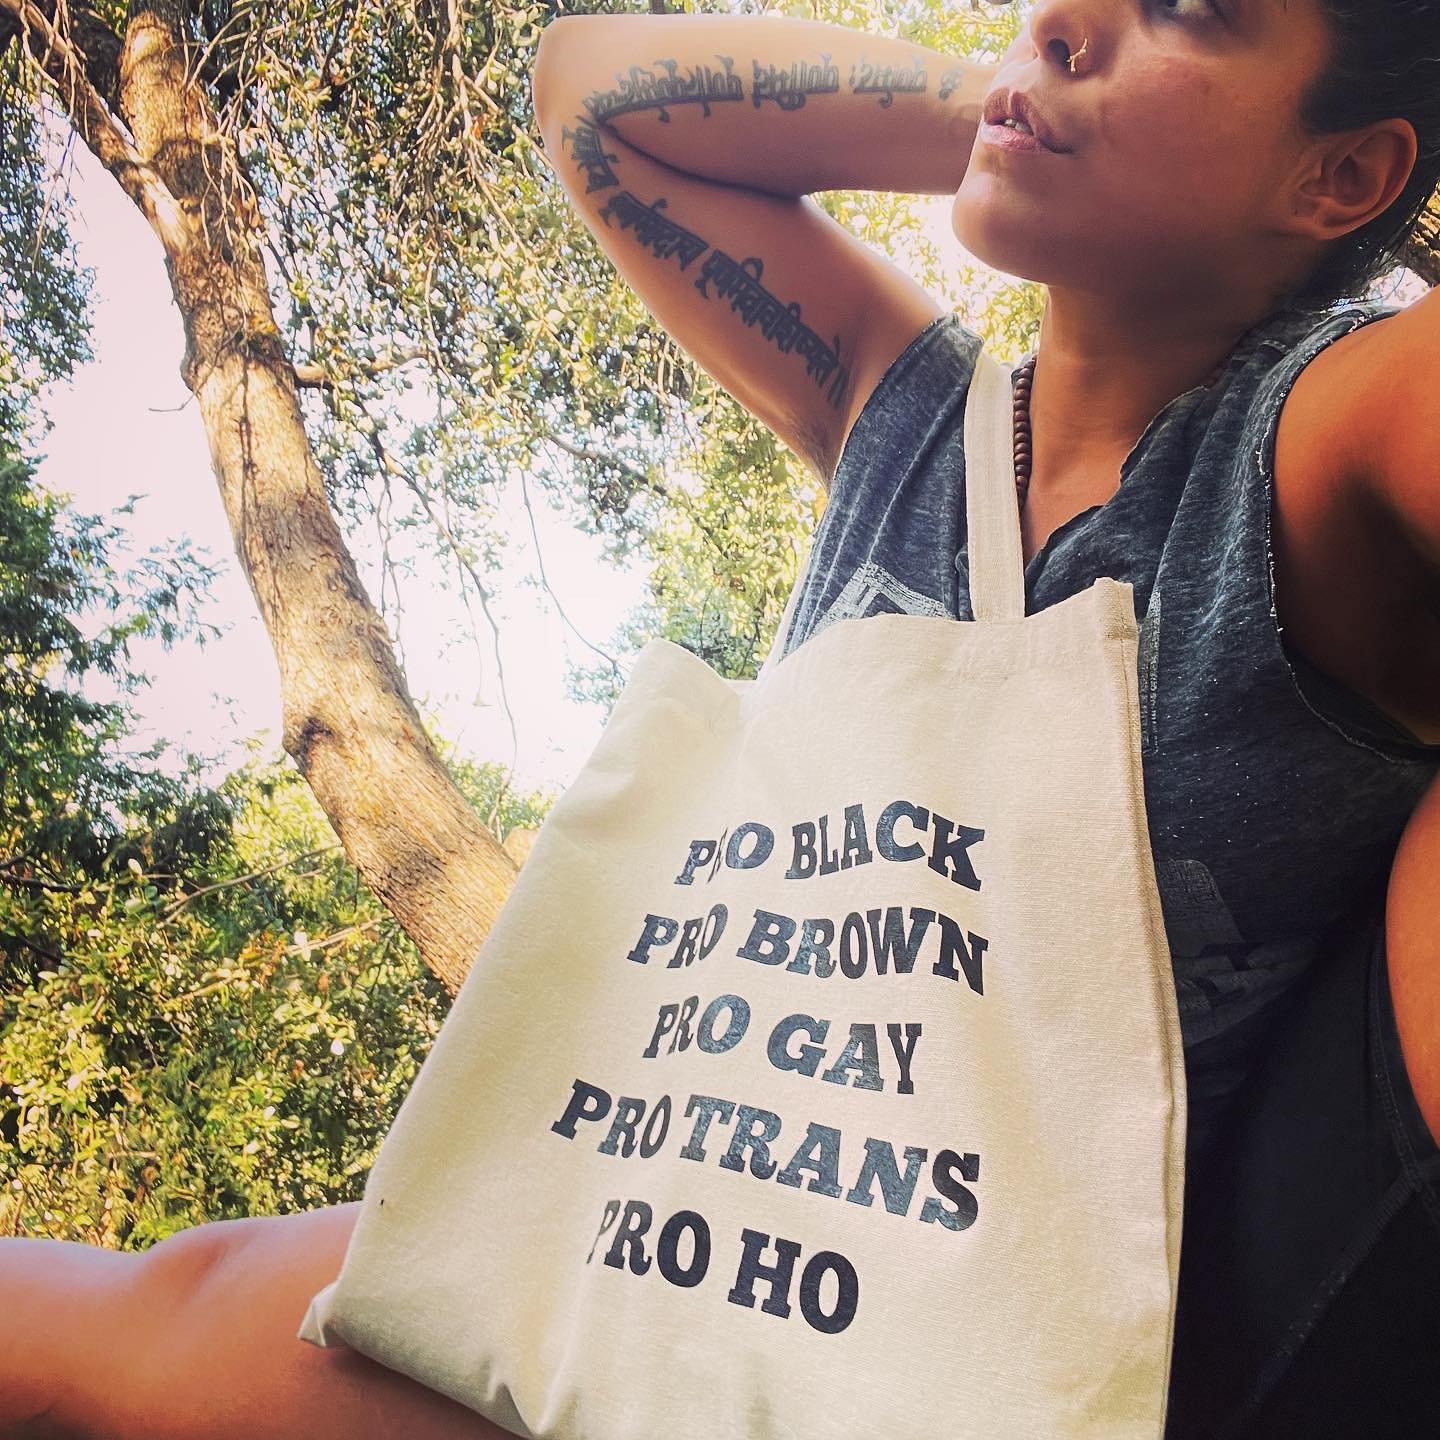 To be clear 👀 - 
Whether i&rsquo;m on set, in clinic, in the recording booth, teaching or facilitating, holding ceremony + ritual, or alone in the forest on retreat - 
What i bring in my bag, and what i do when i secure my bag, is written on my bag.